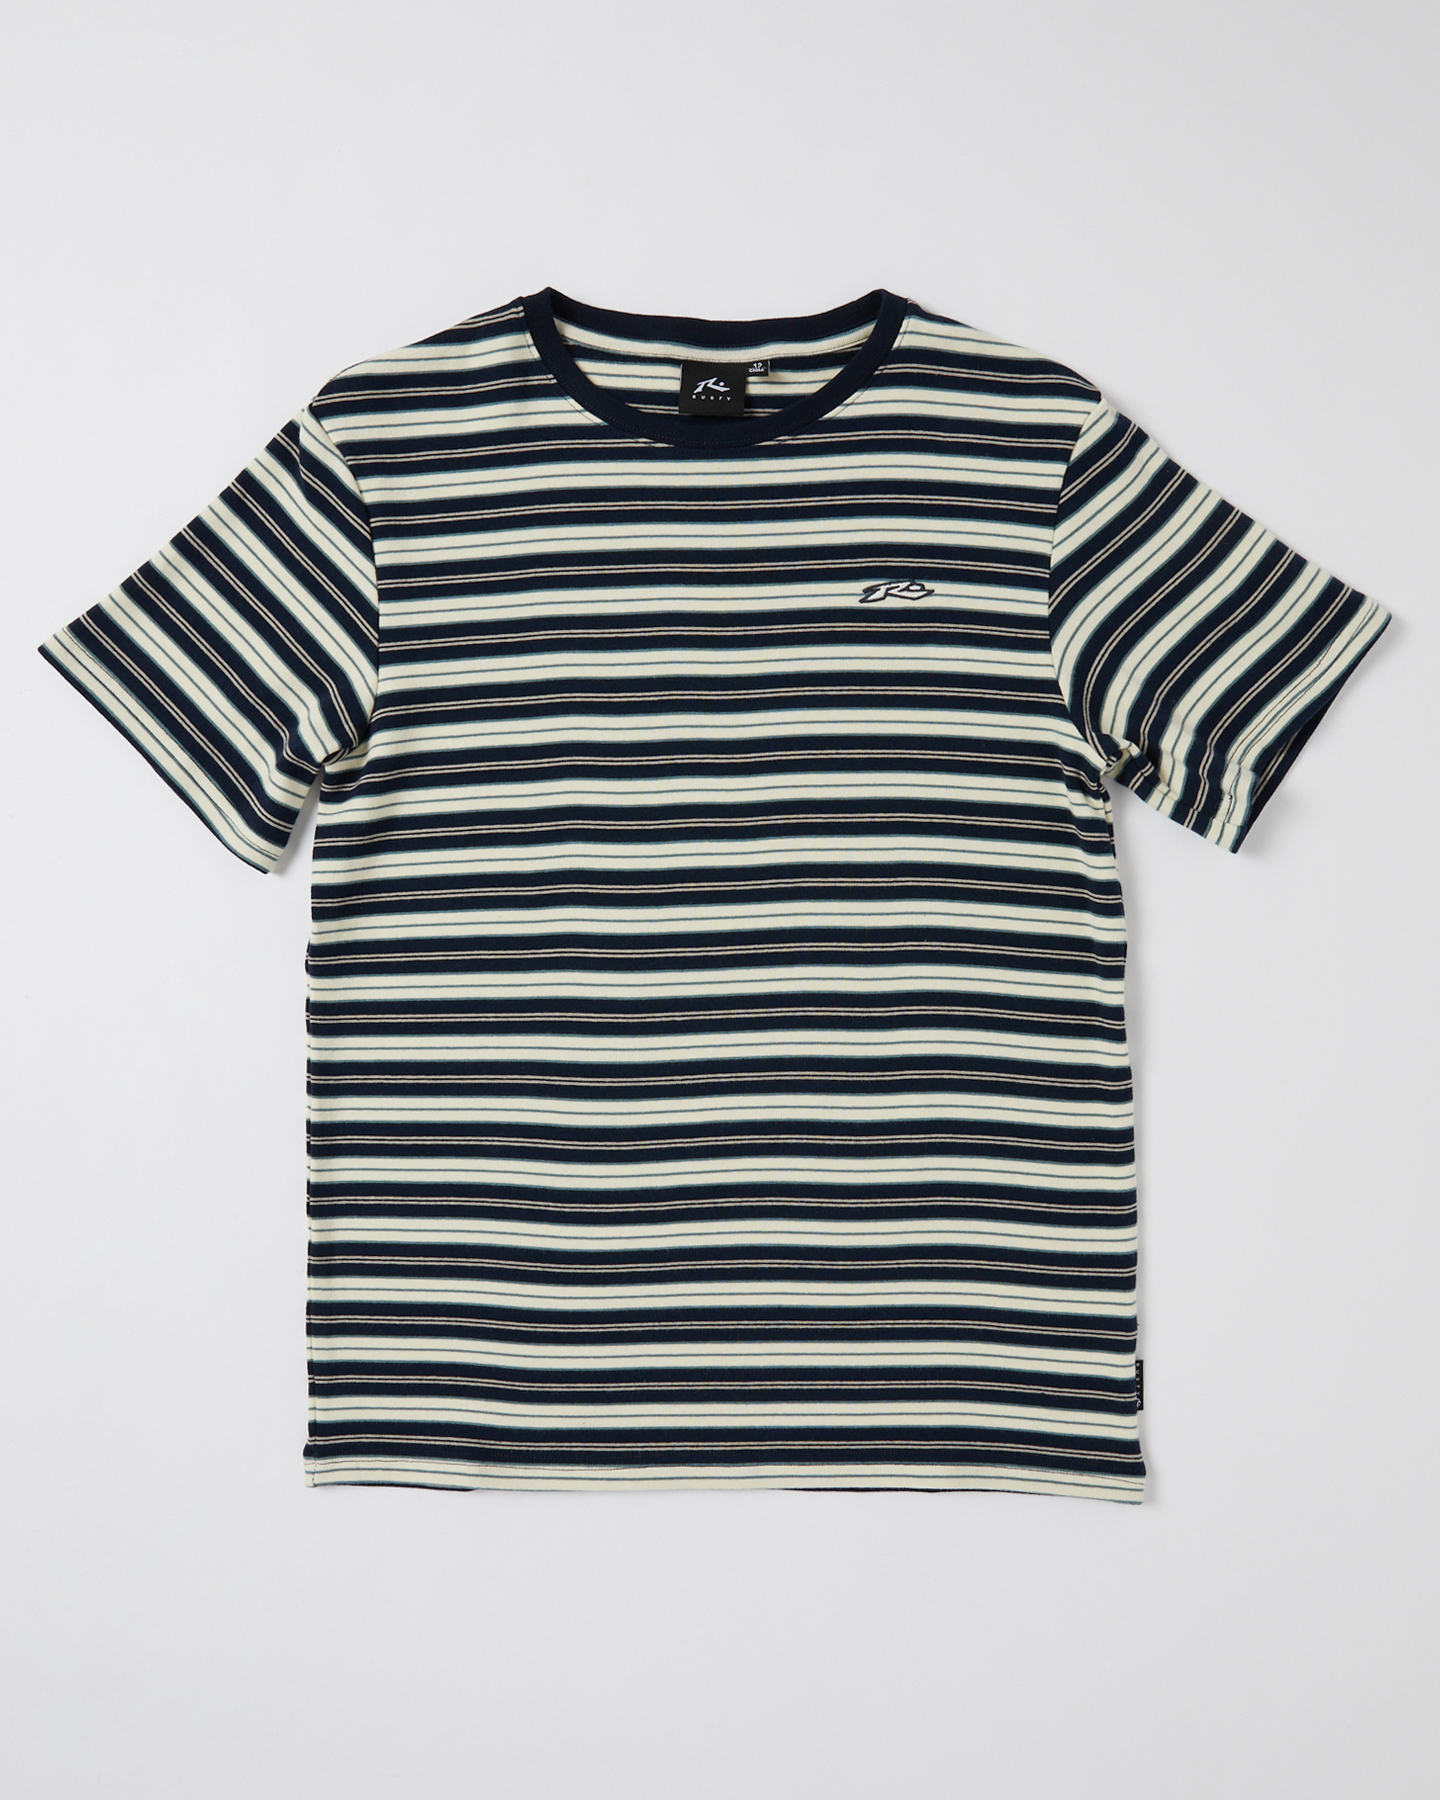 Rusty Biscuits Short Sleeve Tee Boys - Navy Blue | SurfStitch